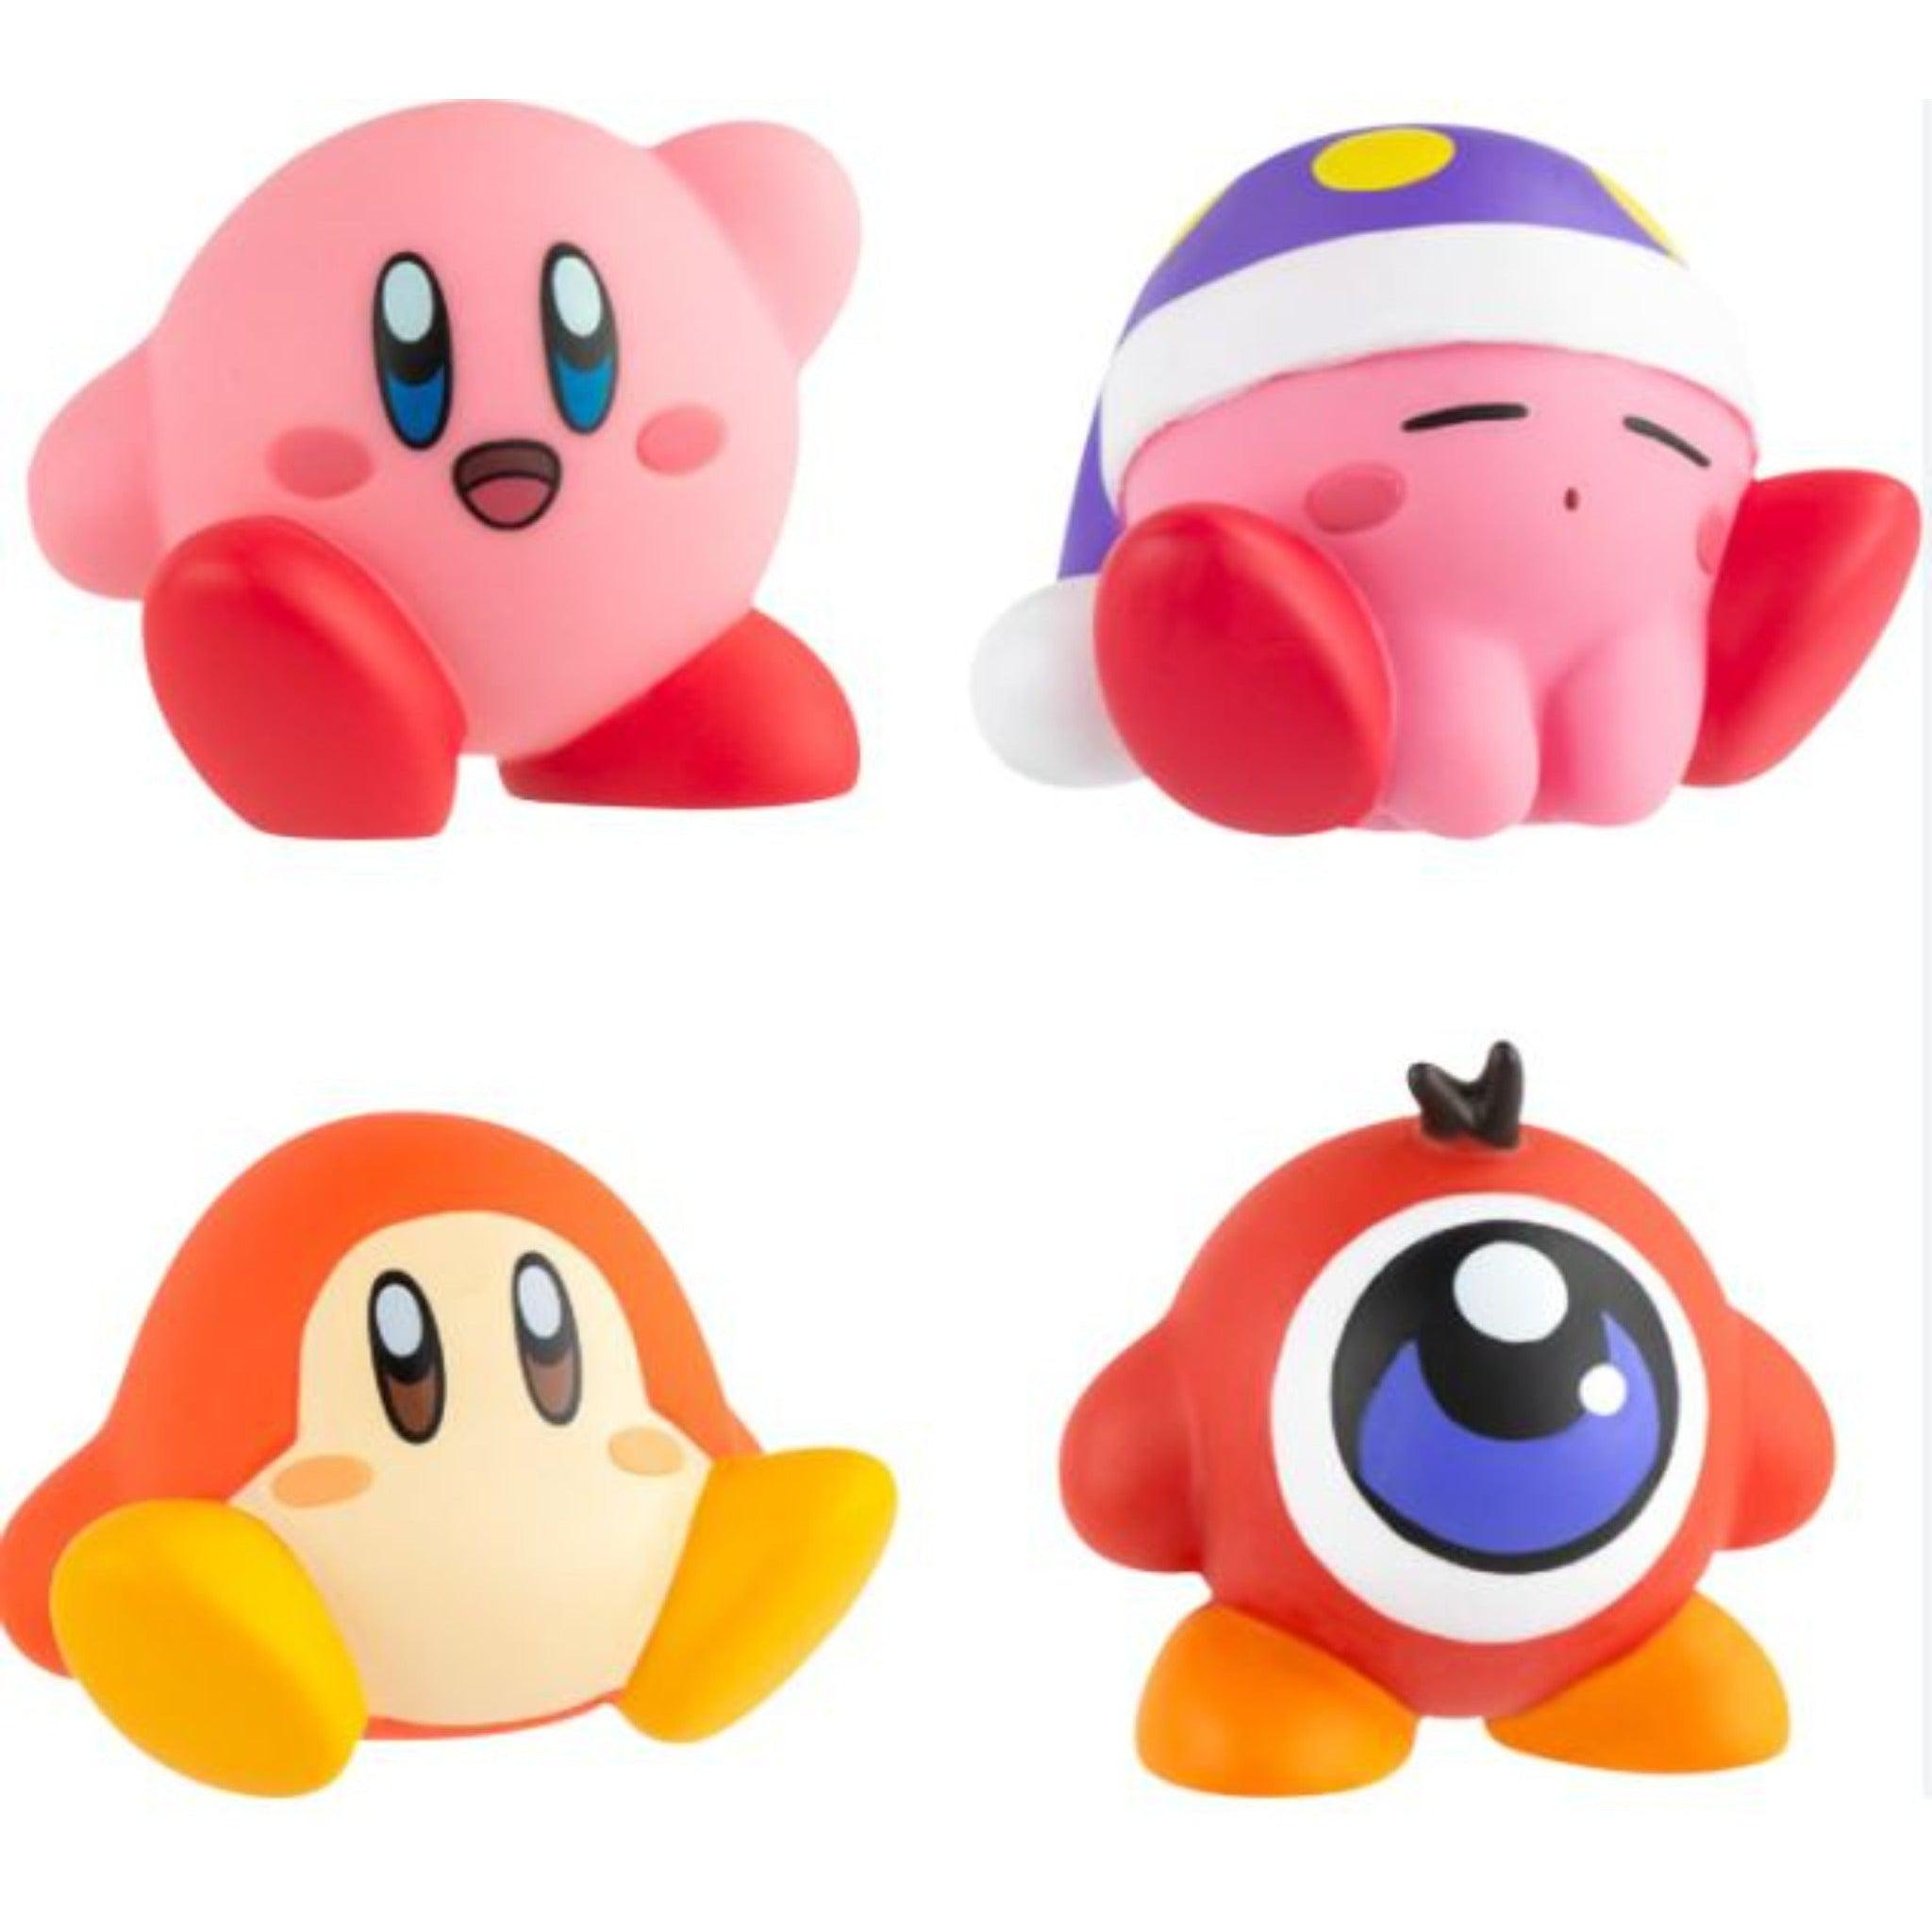 Ultimate Kirby Pack